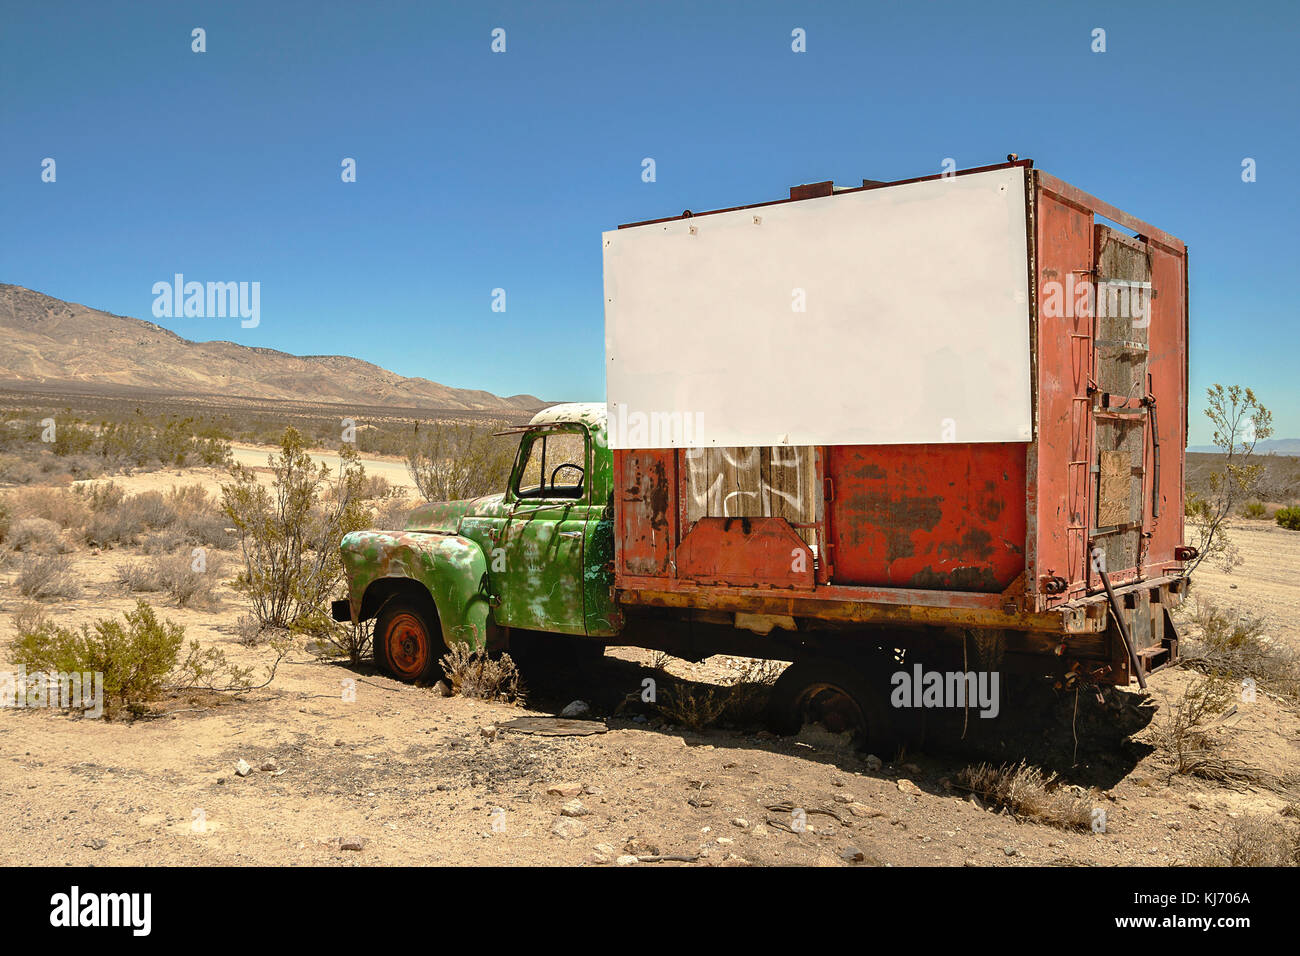 A wreckage of a red and green truck with a white large signboard in the desert. Stock Photo